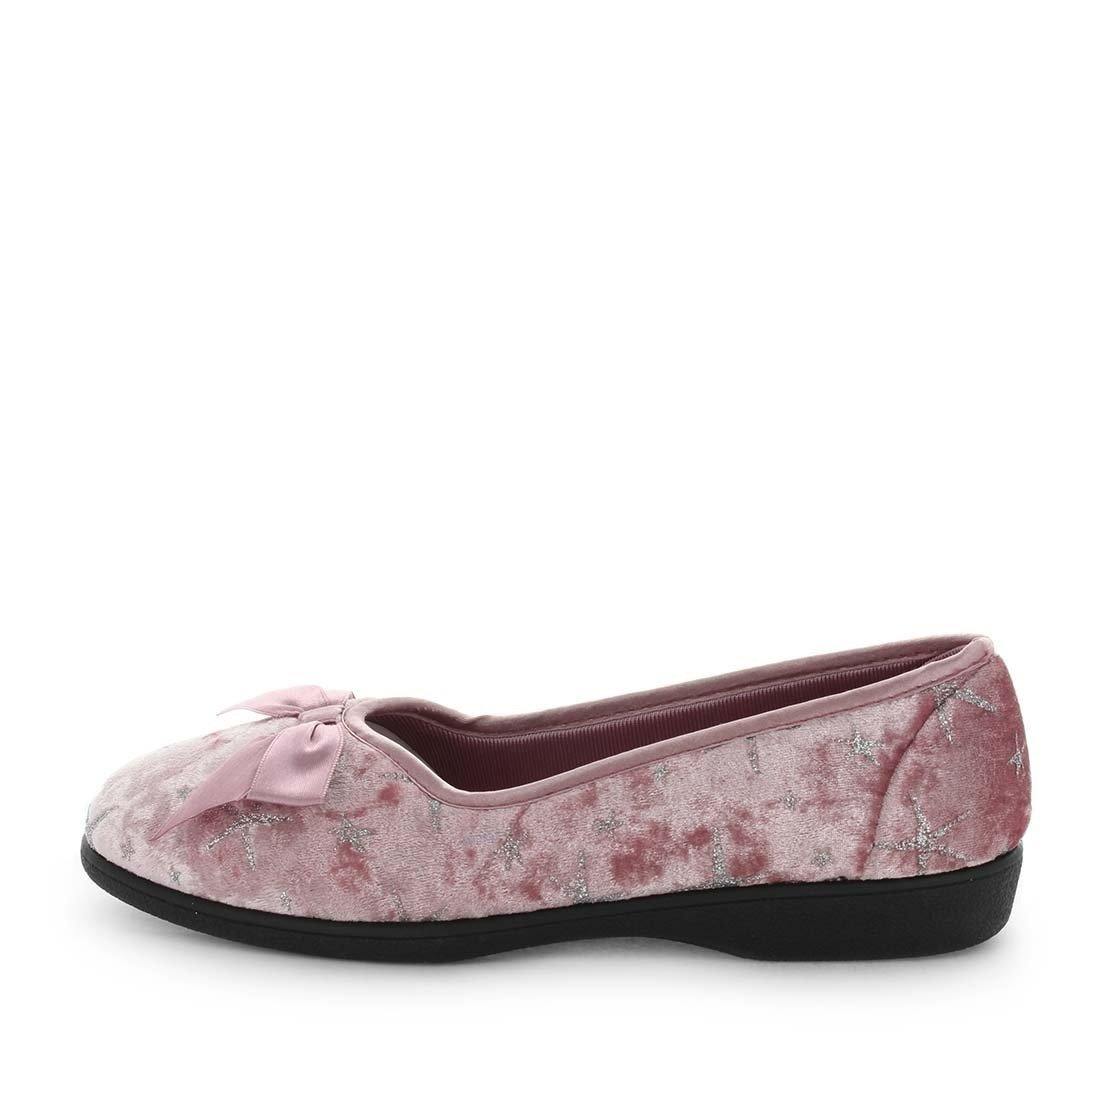 Womens slippers - emilyn by panda slippers. A pink printed velour court and bow slipper with a quilted lining and sock for a soft to touch feel.